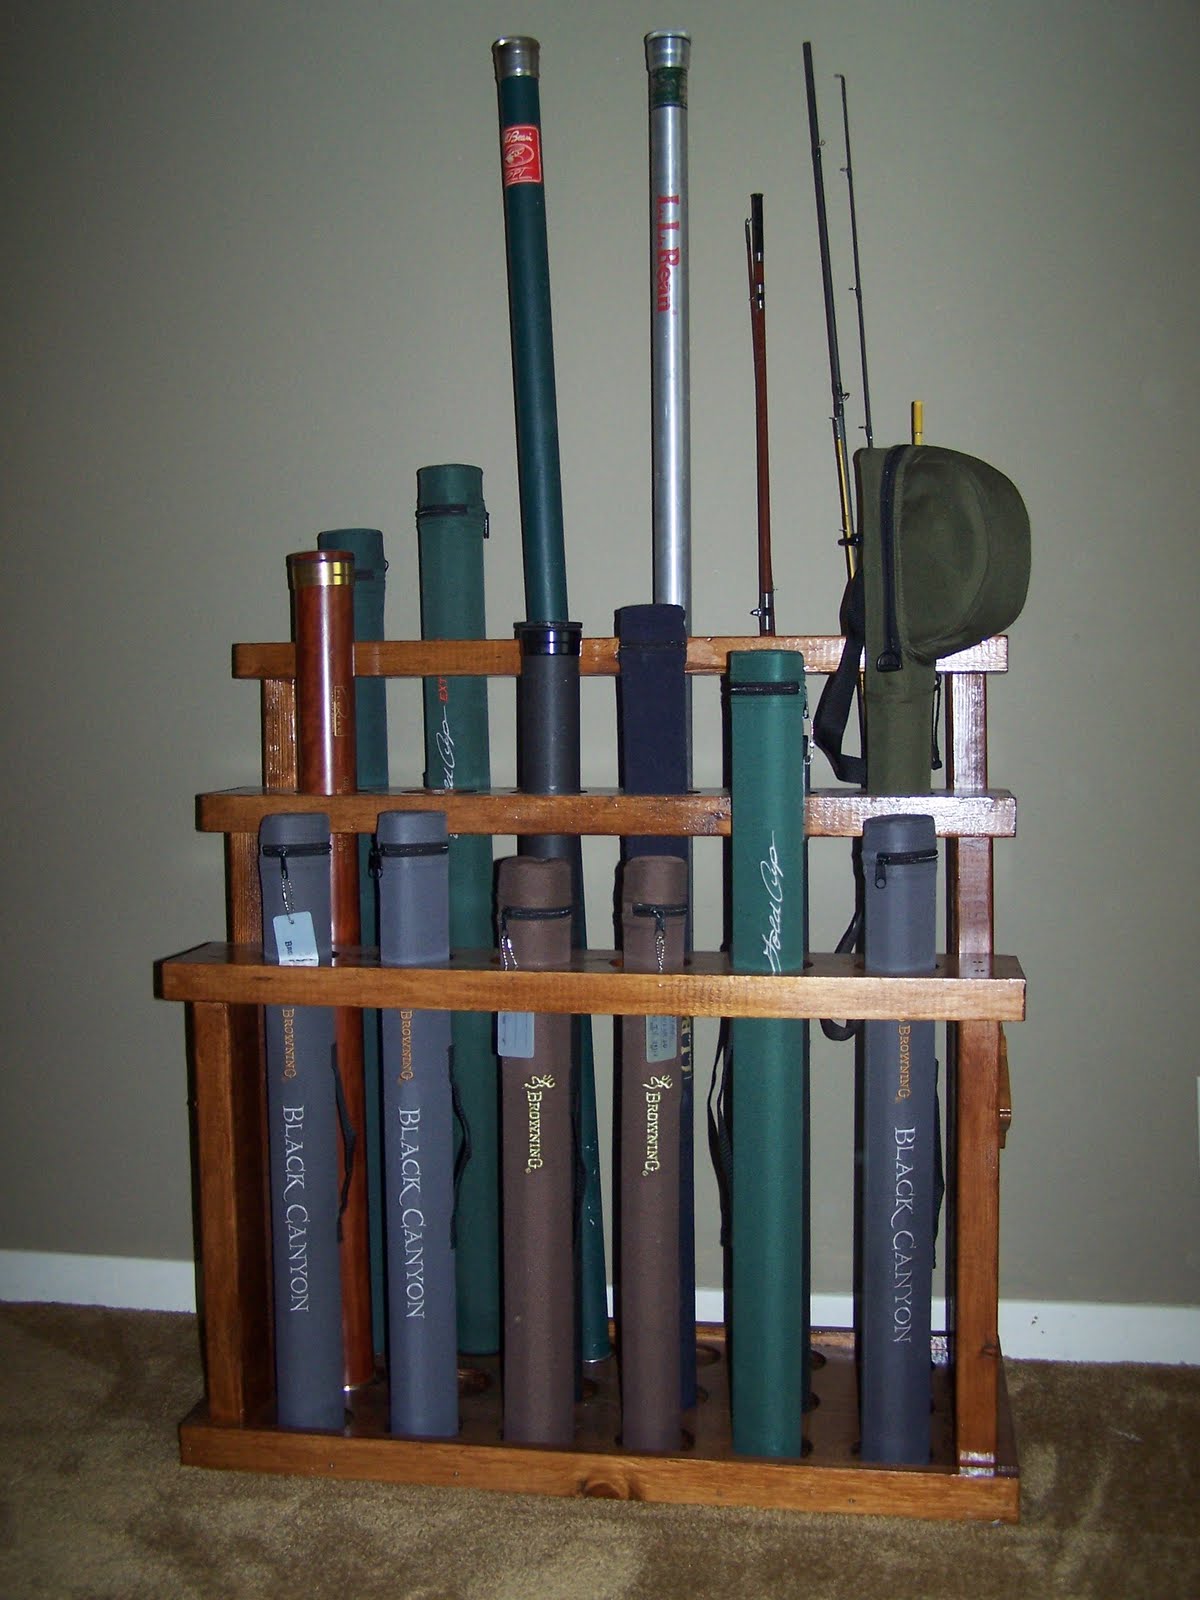 Rod Storage - How do you store yours?